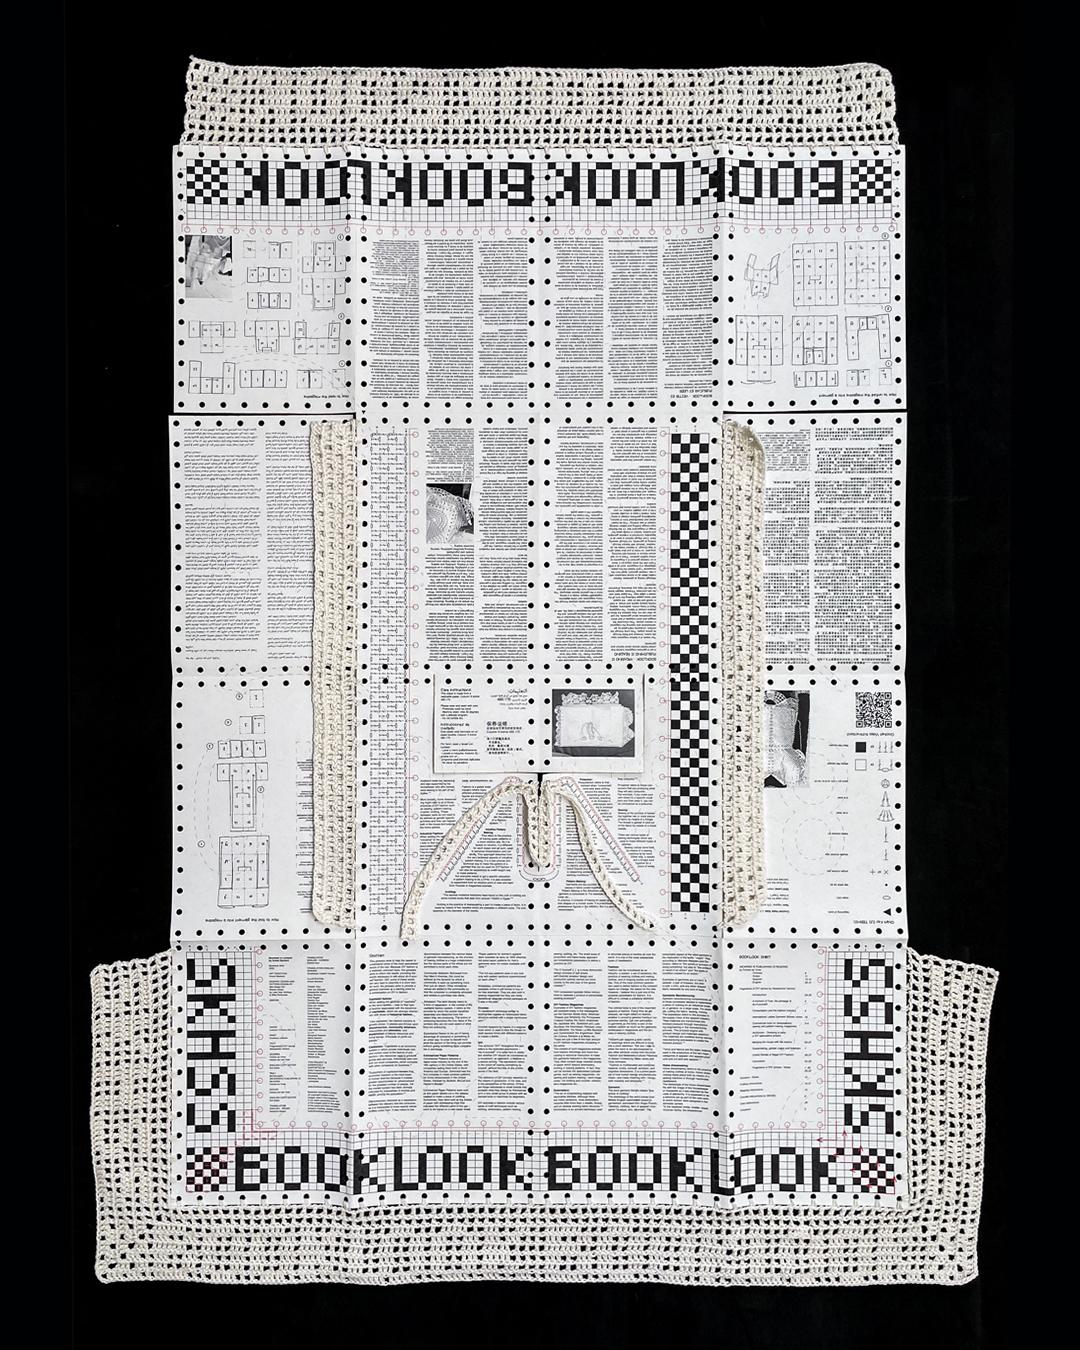 Booklook Shirt, issue 2, crochet made by Mika Perlmutter.